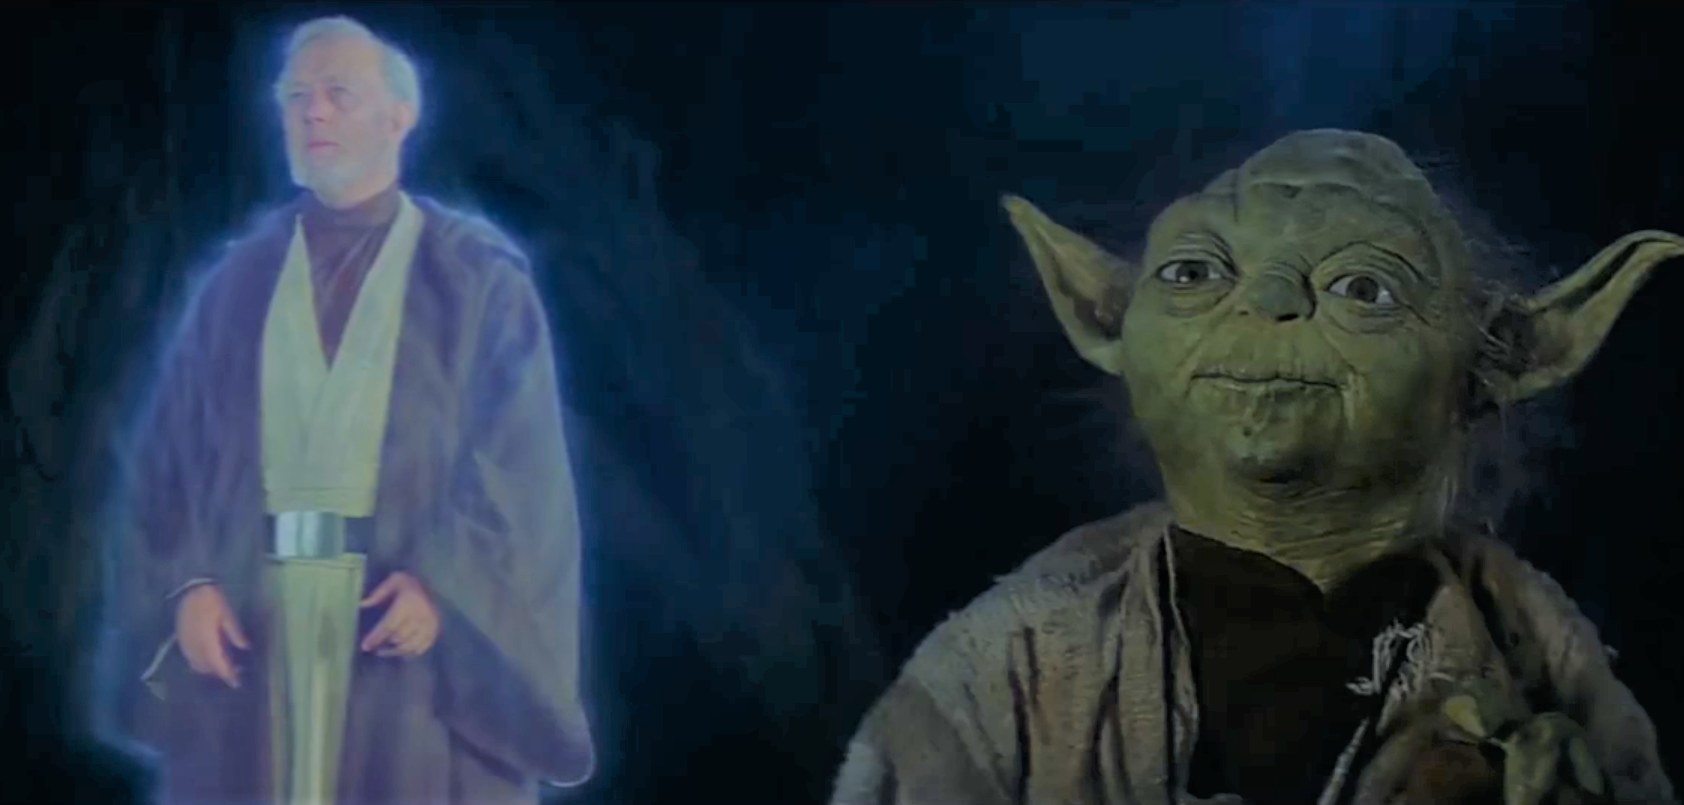 The Force ghost of Obi-Wan stands next to Yoda as they watch Luke fly away